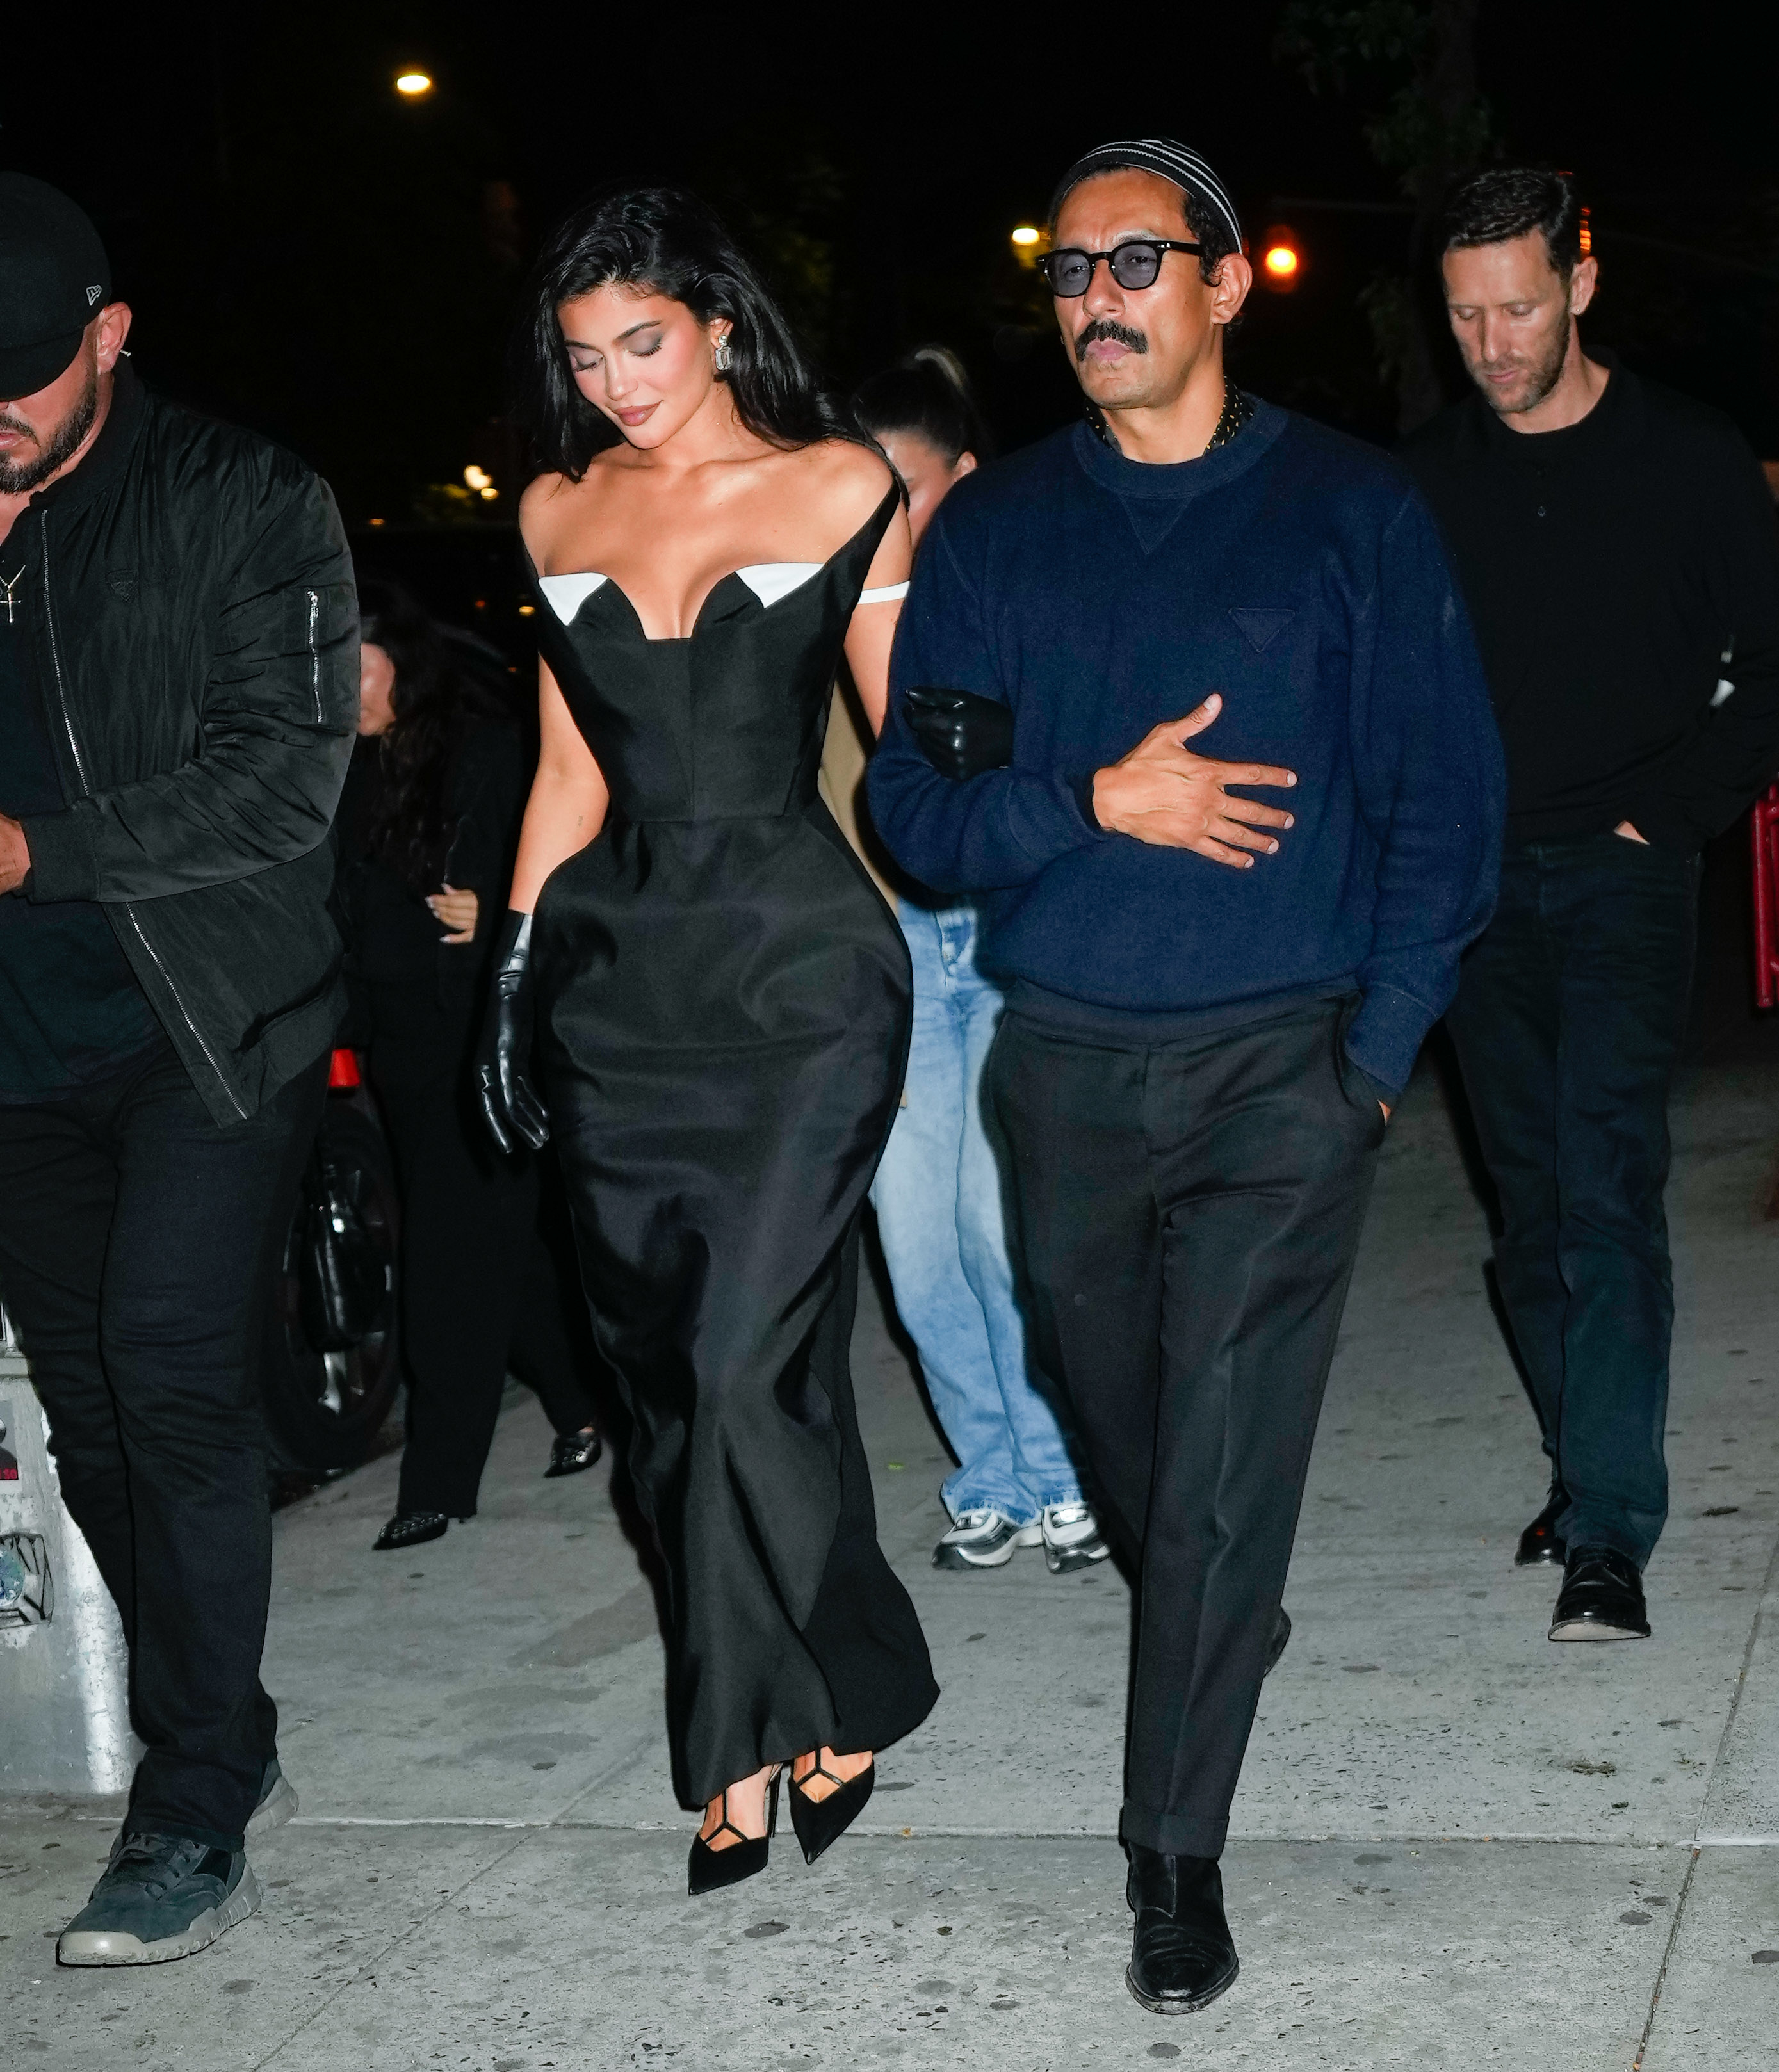 Kylie being escorted